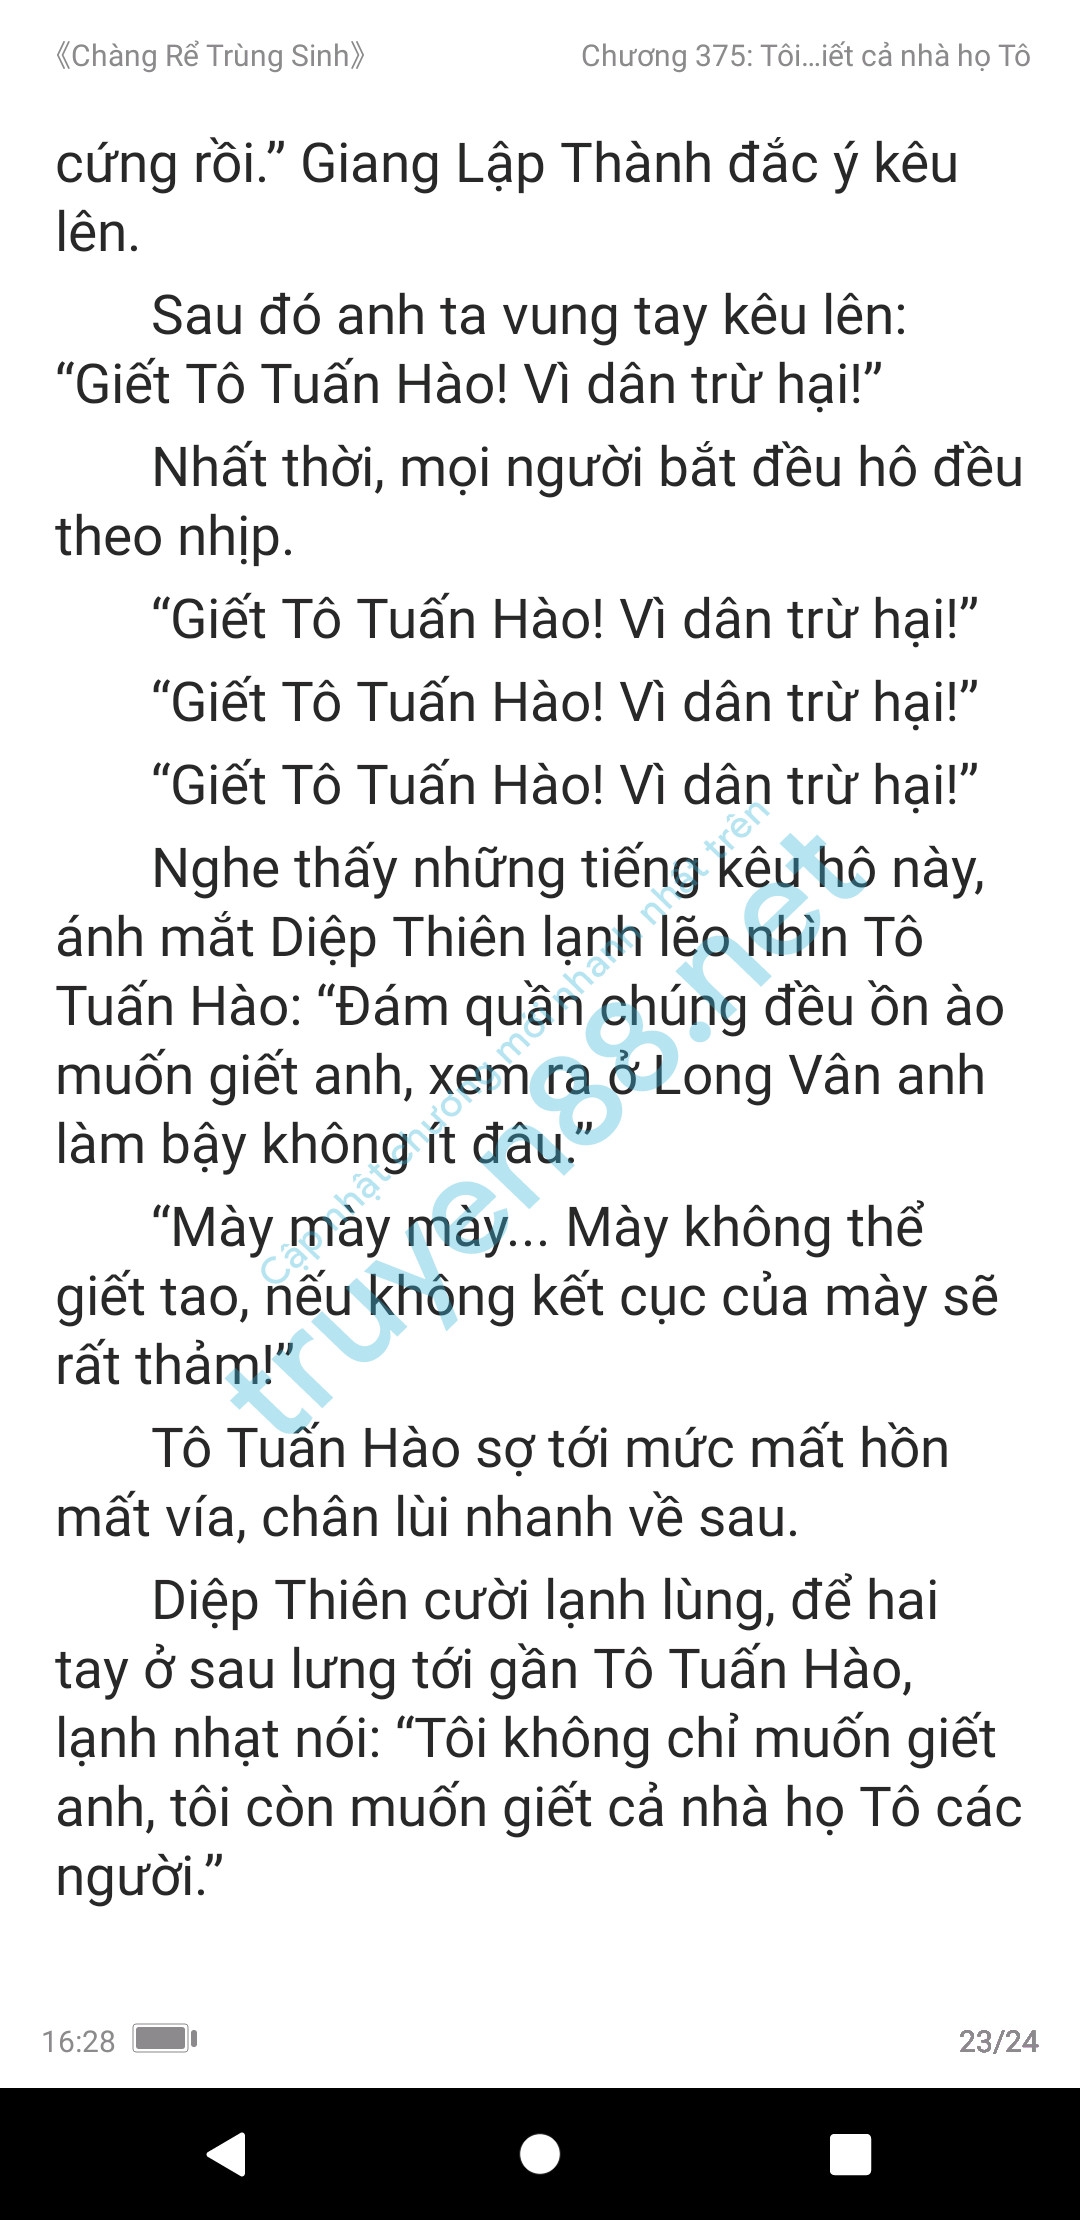 chang-re-trung-sinh-375-2